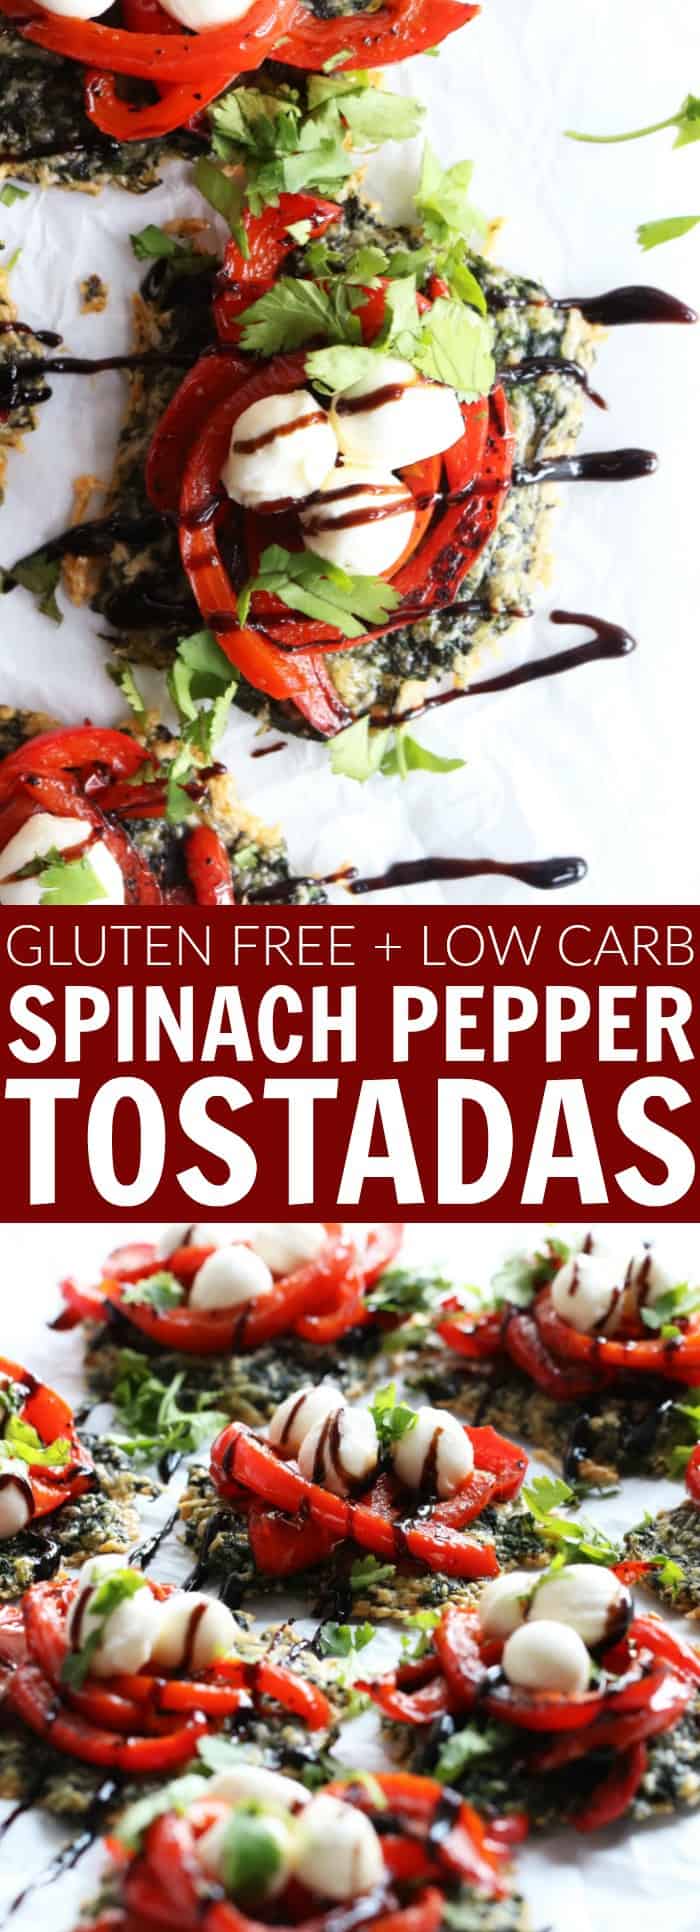 Really fun and delicious low carb + gluten free Spinach Pepper Tostadas!! You'll love how simple these are to make and how fun they are to eat! They're a perfect party appetizer!! thetoastedpinenut.com #lowcarb #keto #glutenfree #primal #healthy #appetizer #spinach #tostadas